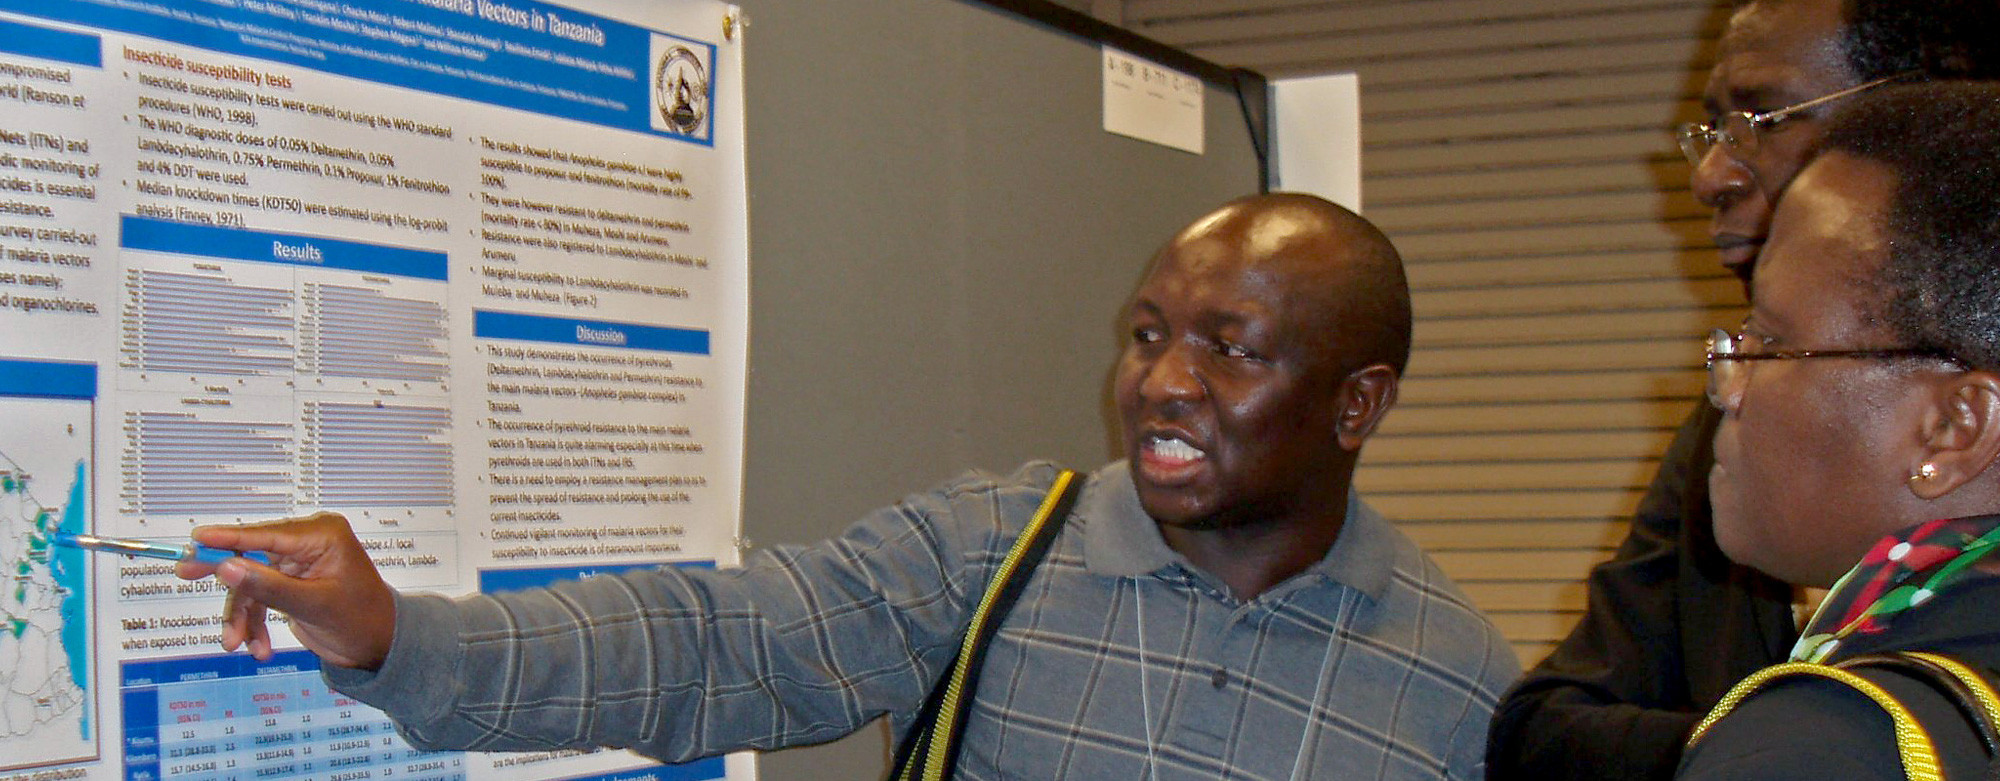 Three researchers looking at a poster at a research conference.